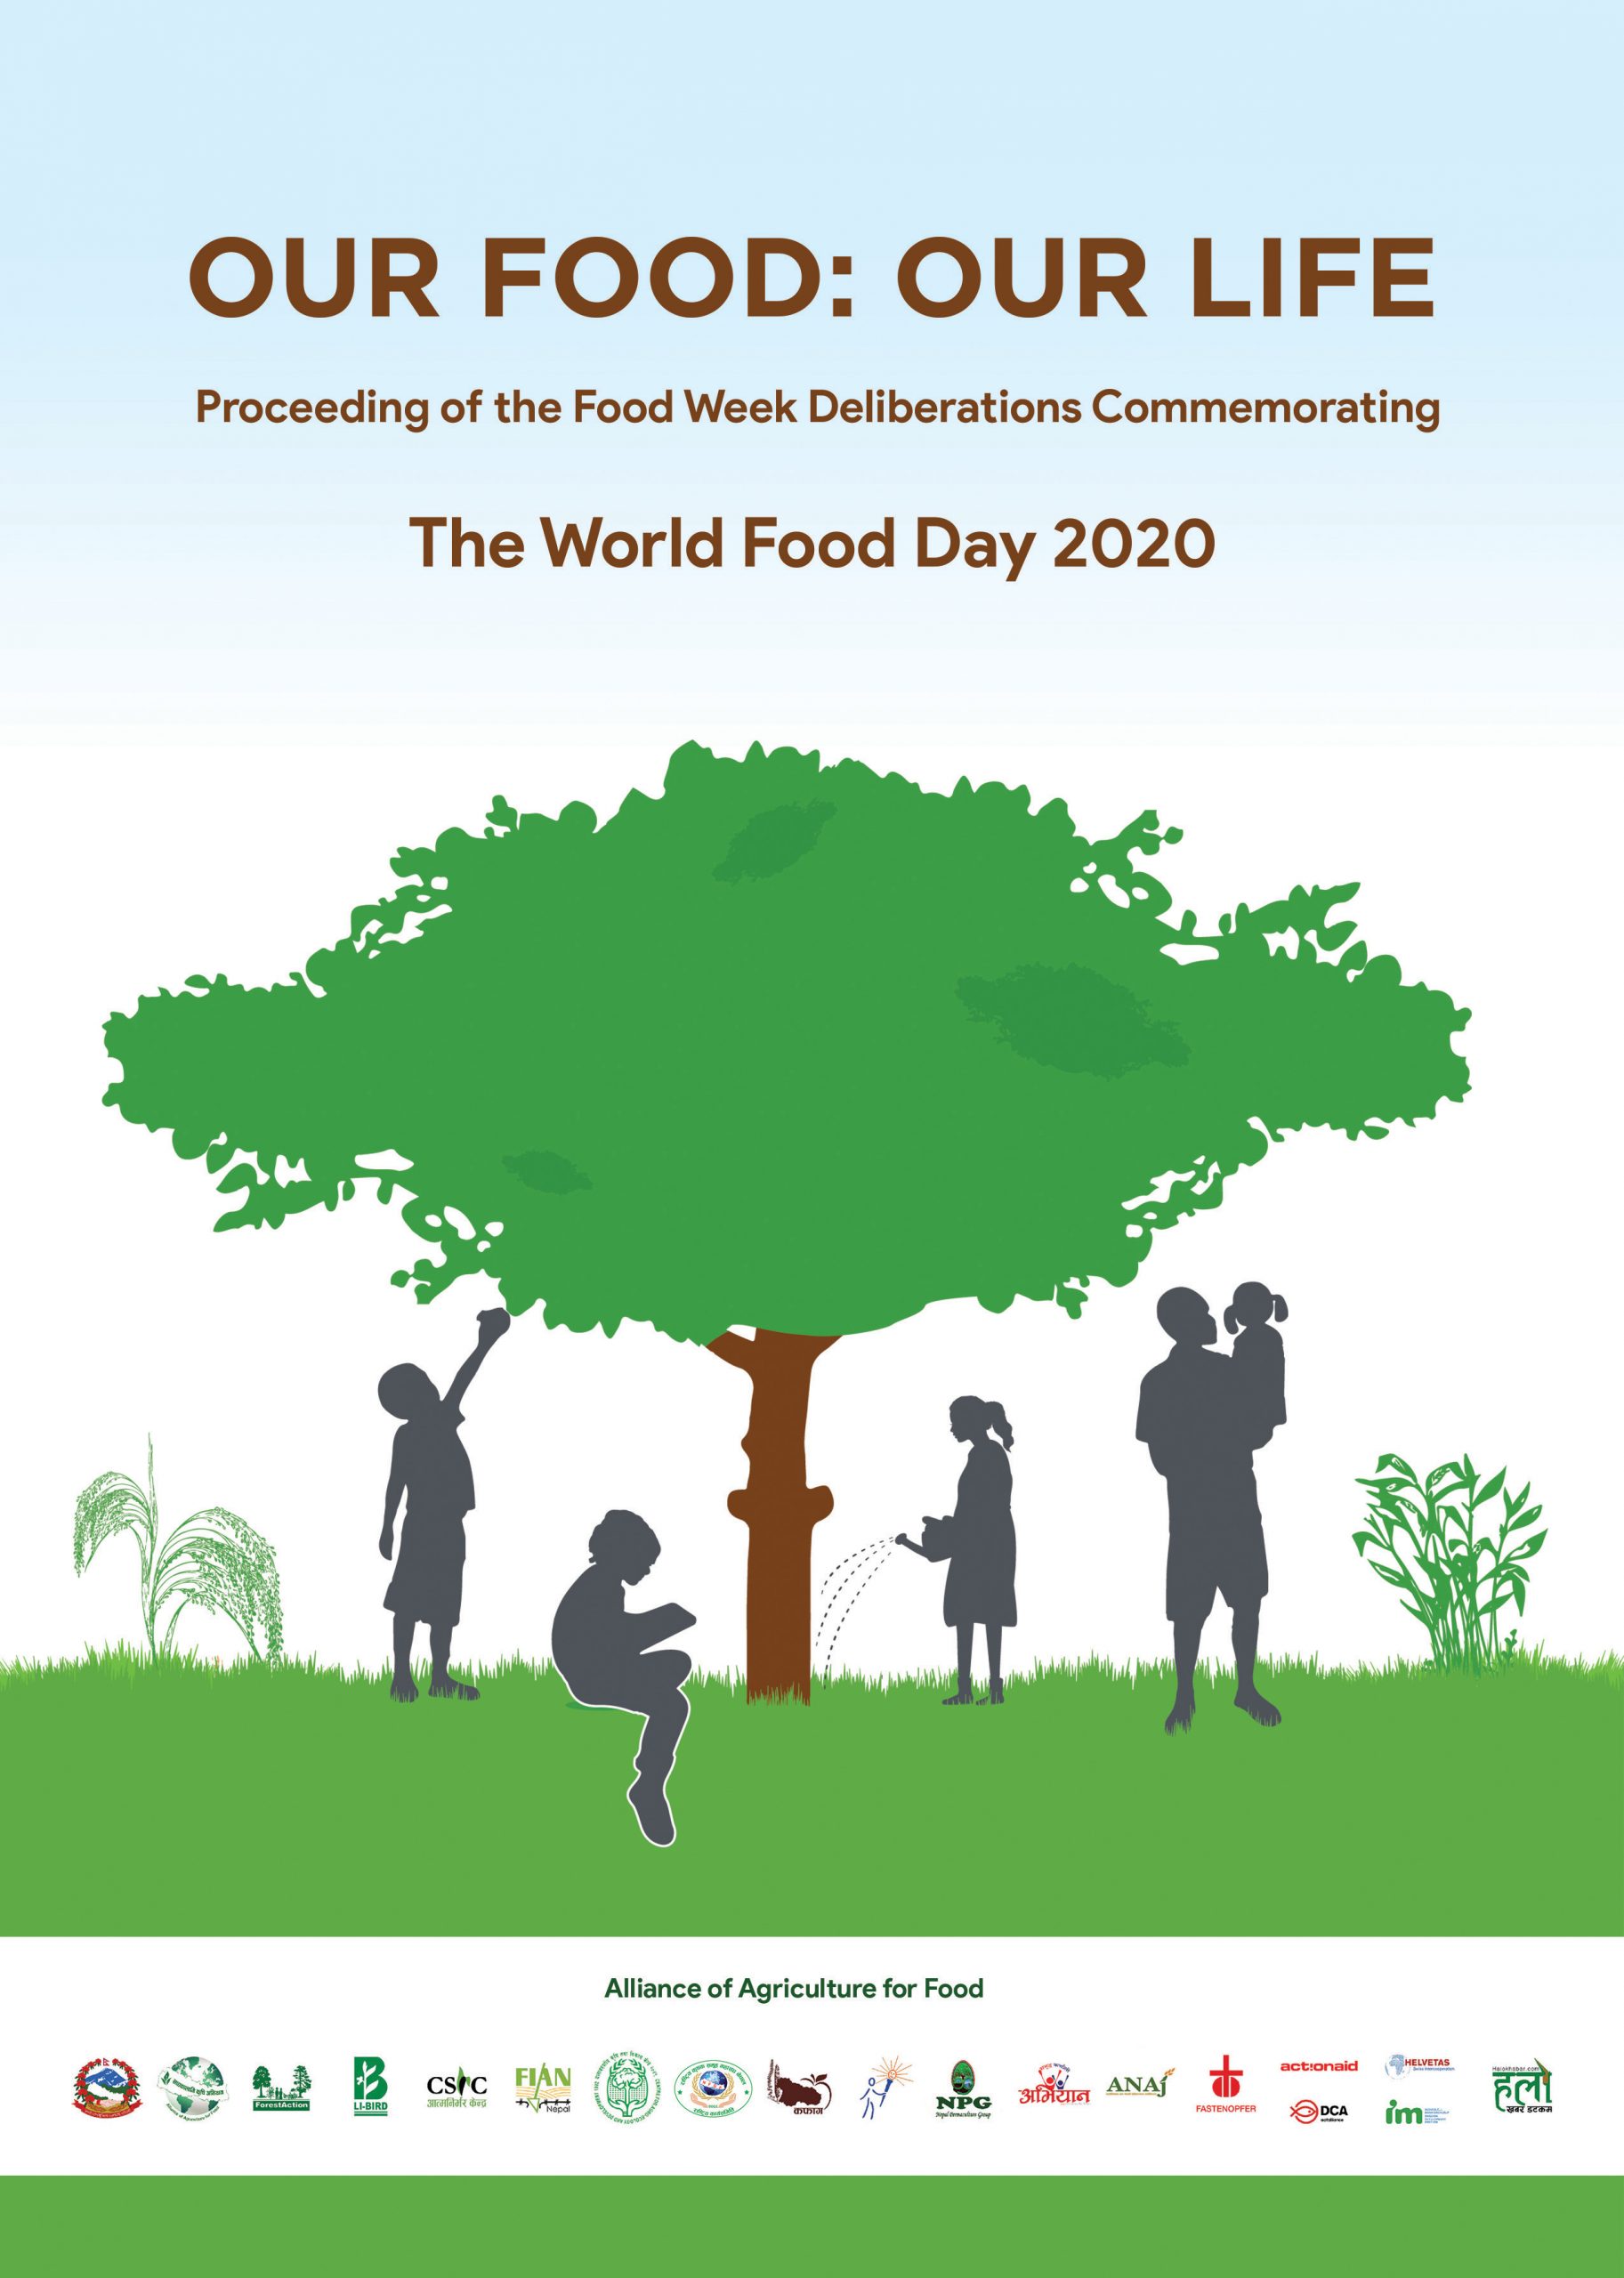 Our Food: Our Life, Proceeding of the Food Week Deliberations Commemorating World Food Day 2020